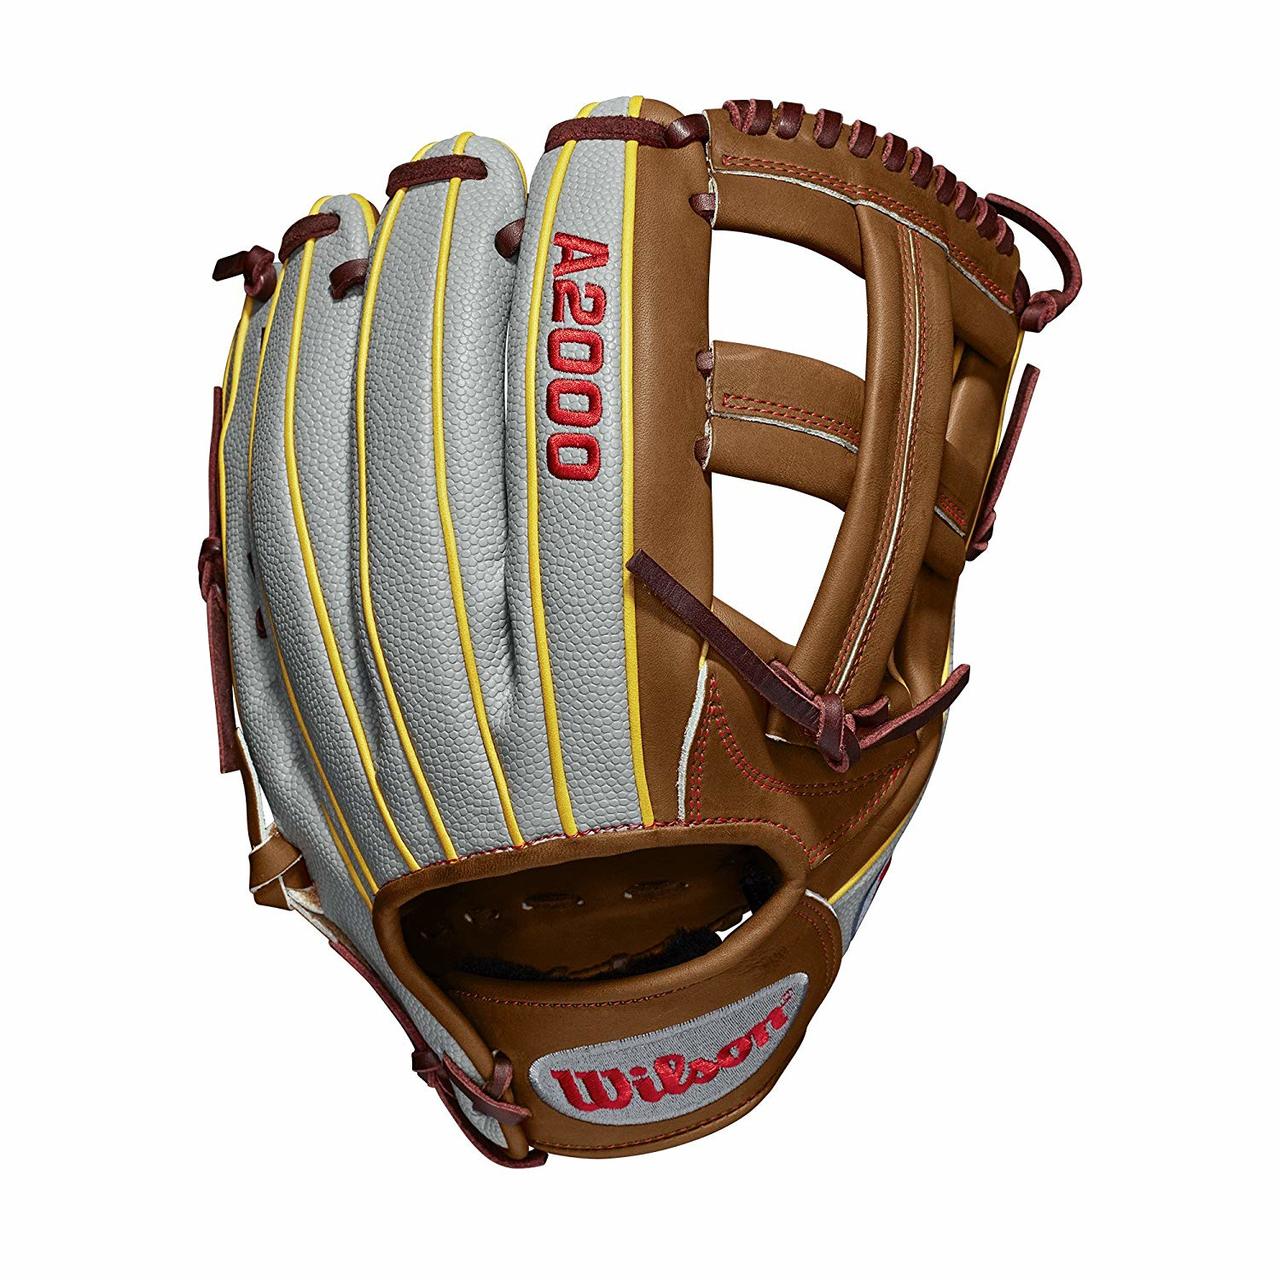 Game WTA20RB19DP15GM for Dustin pedroia; Cross web Grey SuperSkin with saddle tan and yellow gold Pro Stock leather, preferred for its rugged durability and unmatched feel Pedroia fit, made to function perfectly for players with smaller hands Narrow finger stalls Rolled dual welting for long-lasting shape and a quicker break-in